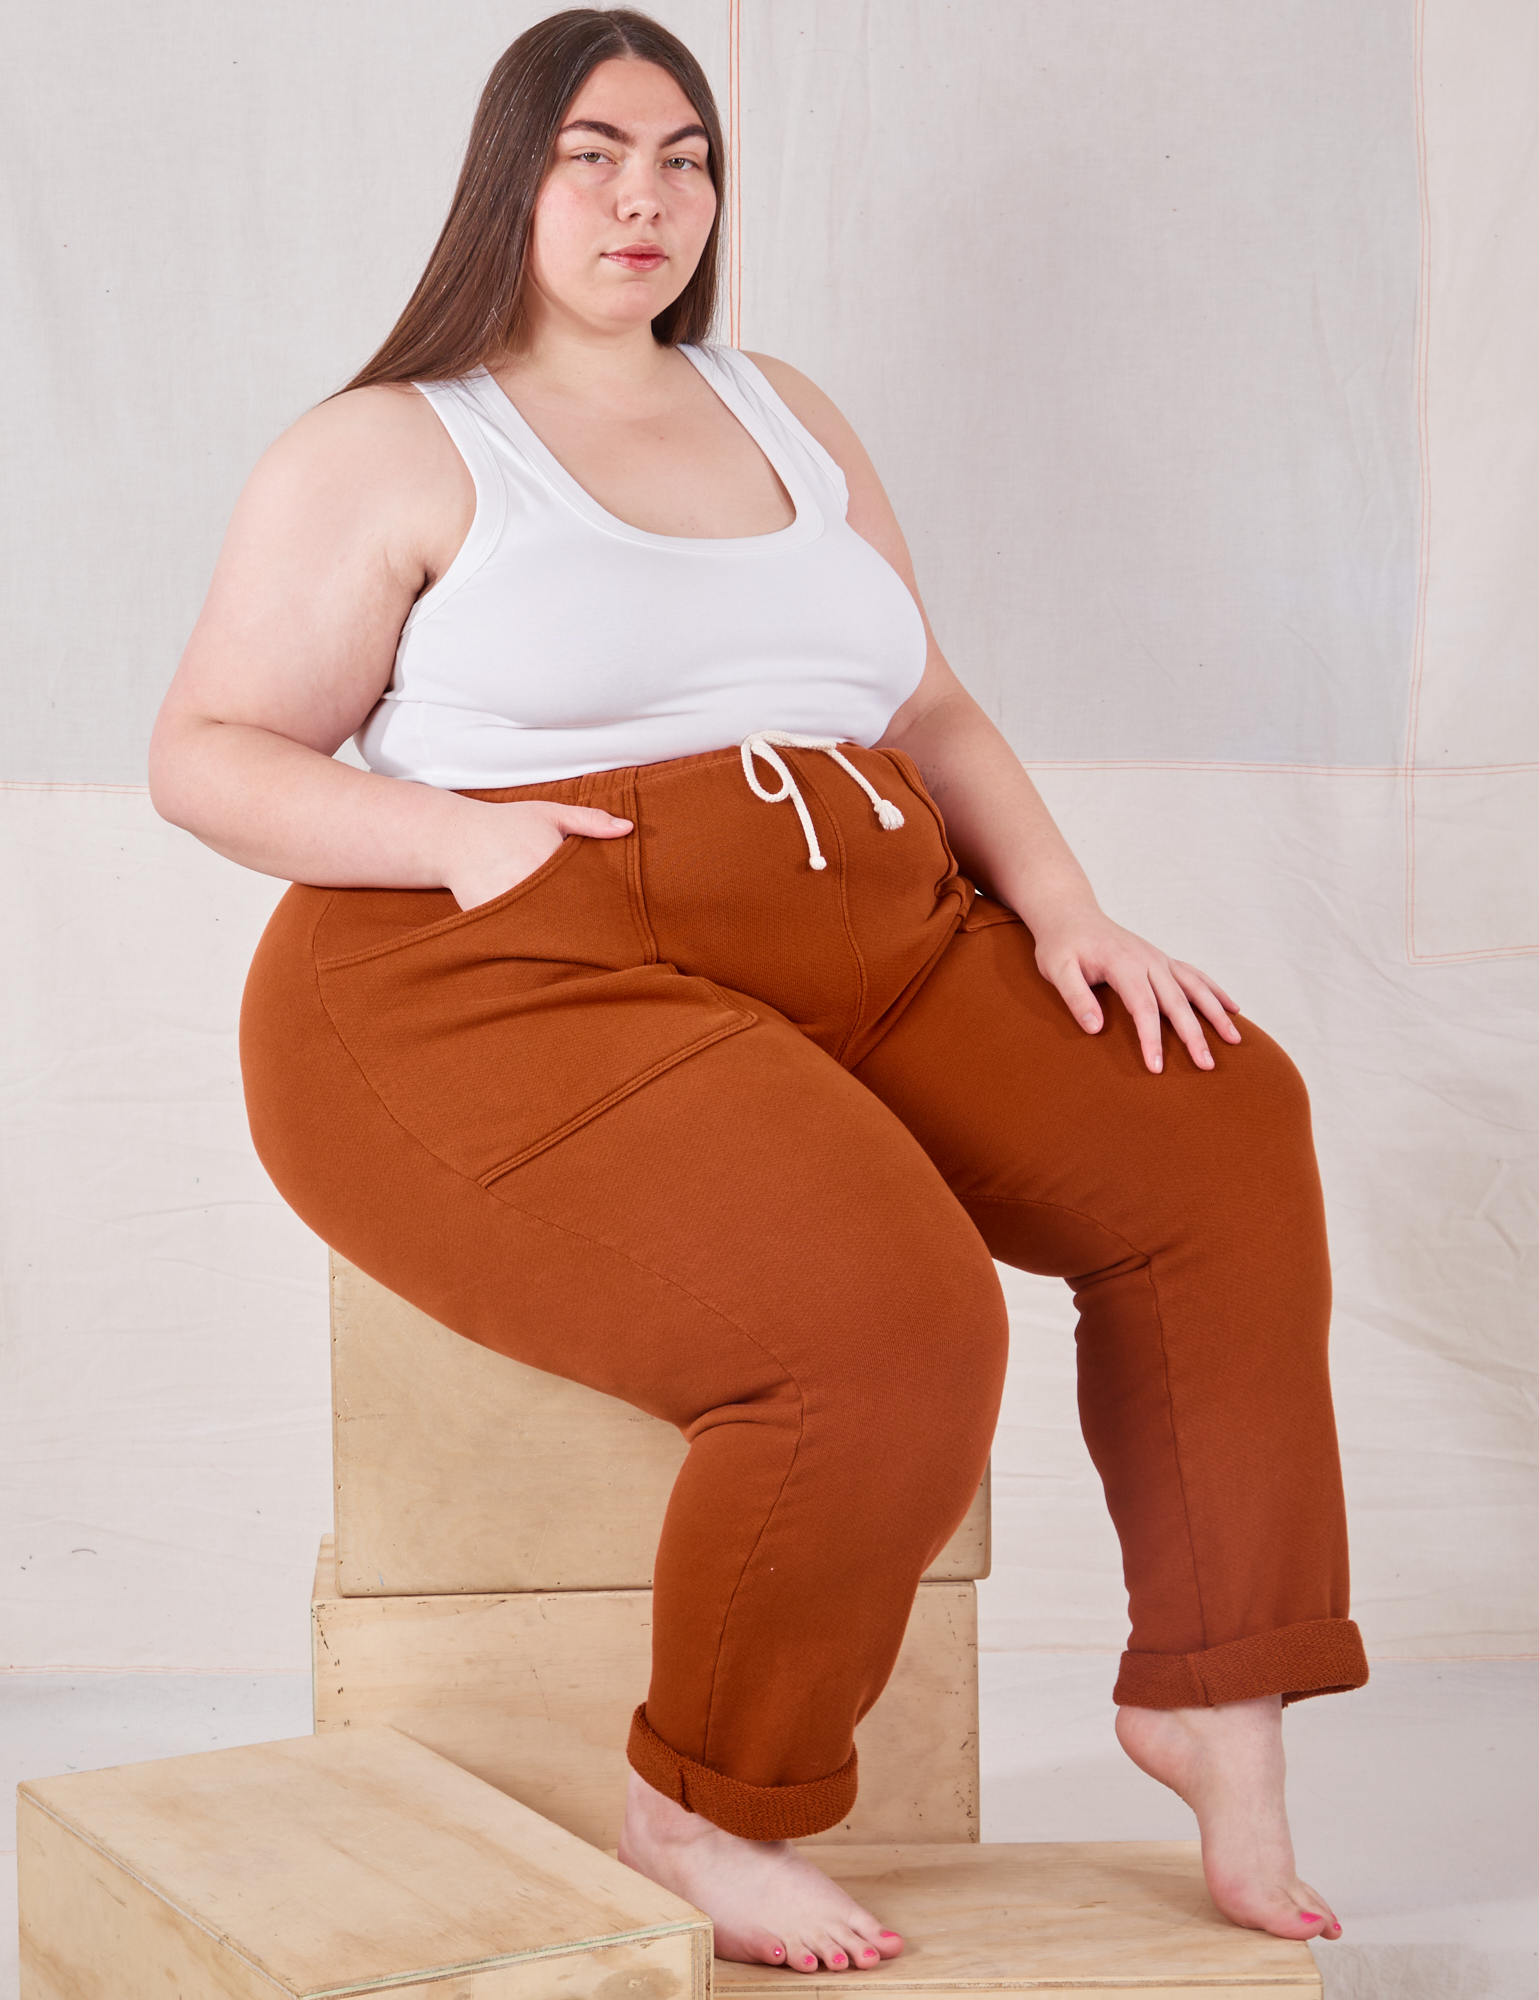 Marielena is wearing Rolled Cuff Sweat Pants in Burnt Terracotta and vintage off-white Cropped Tank